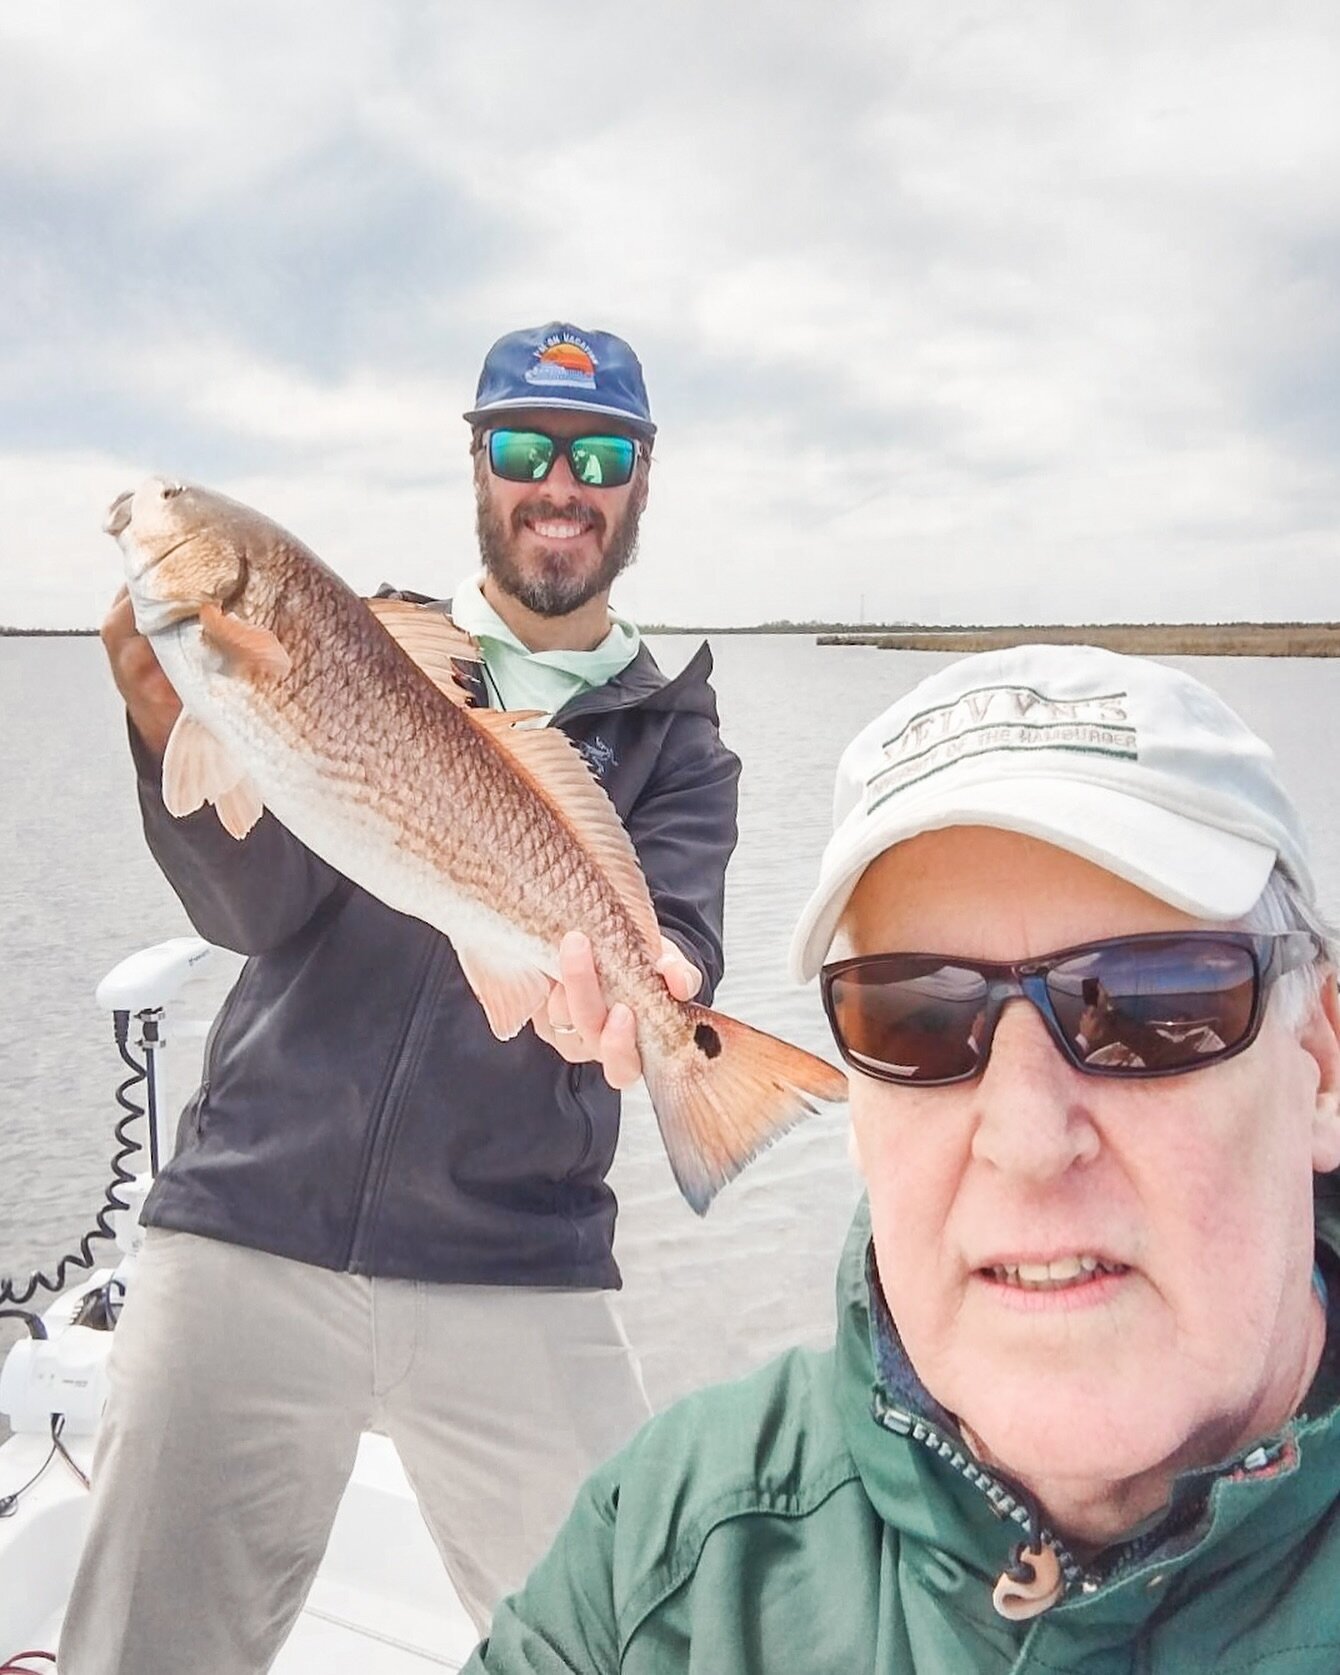 Cat&rsquo;s in the Cradle 〰️ the McCoy&rsquo;s made a surprise visit to New Orleans and Capt Bradley got to take his Dad out for a few casts&mdash;with some nice fish to boot! Gotta make time for that Father-Son quality time. 
&bull;
#imonvacation #f